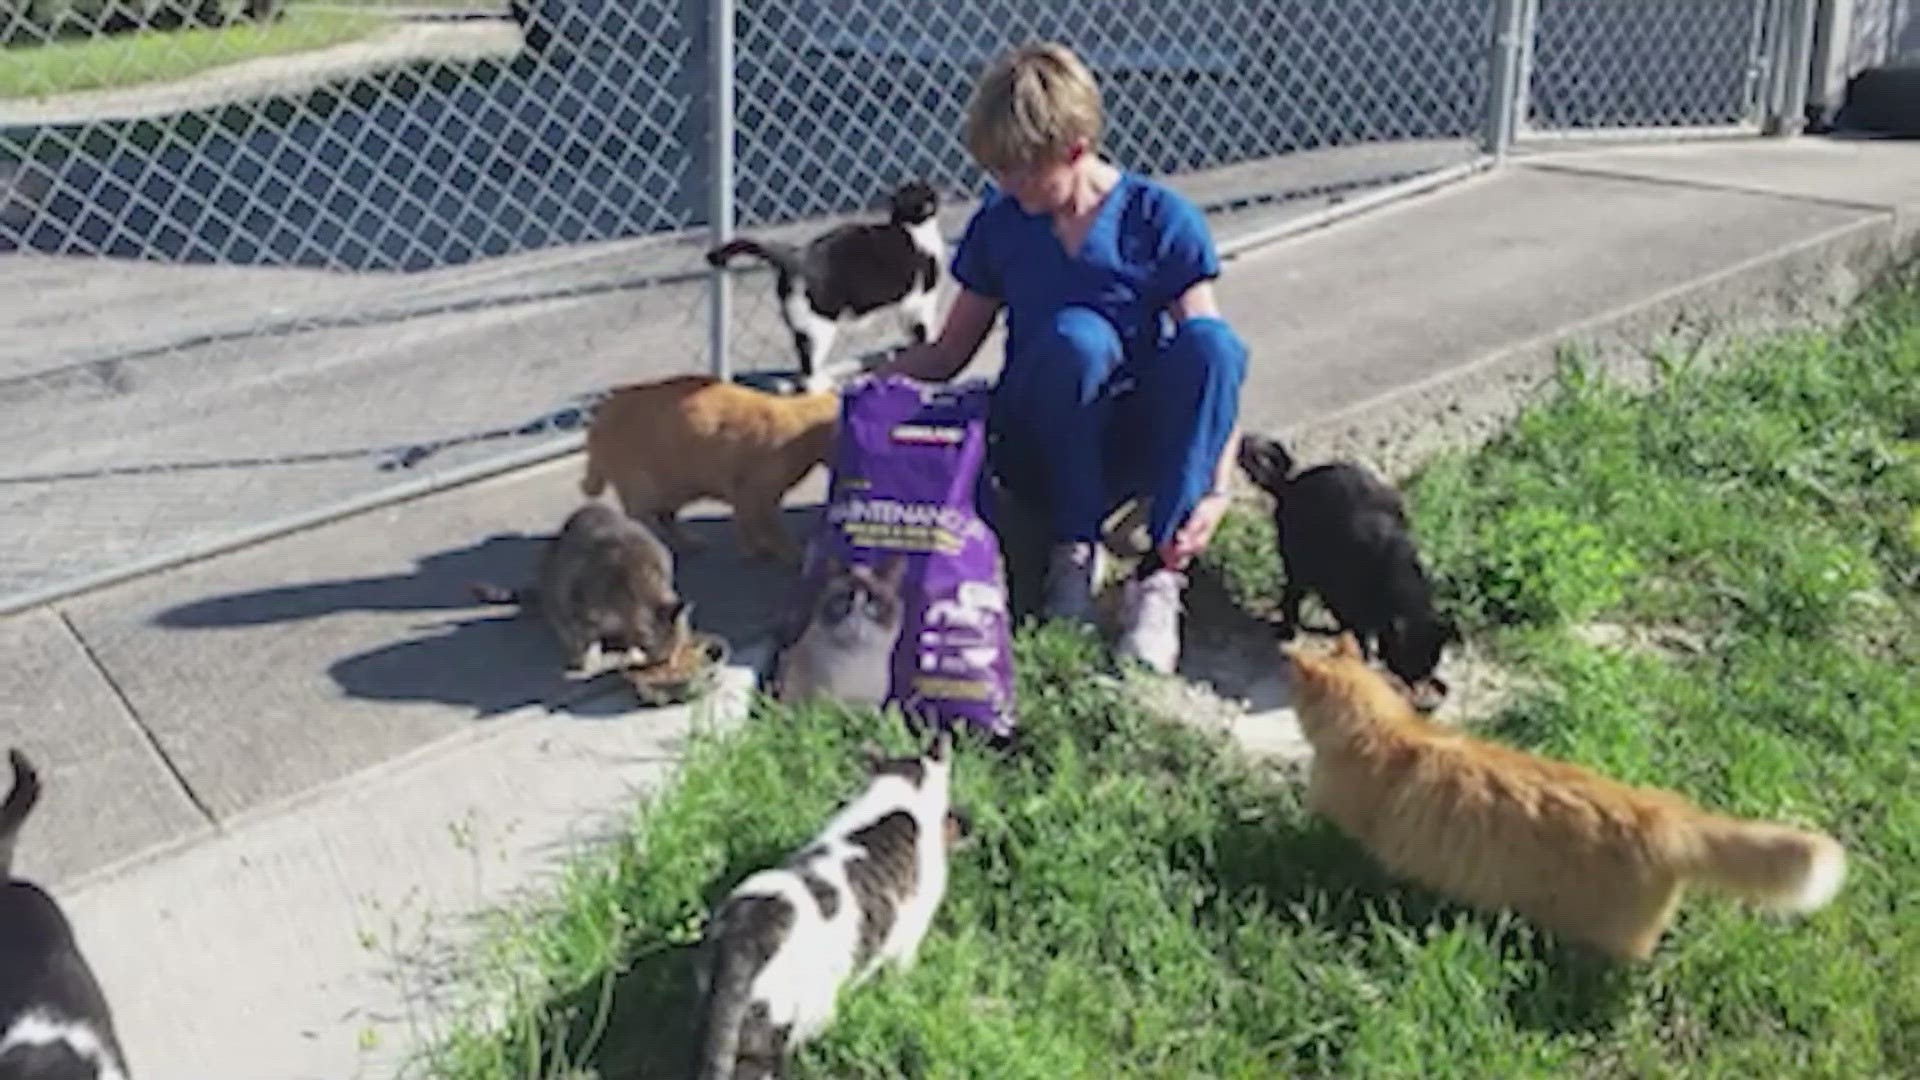 With shelters full the cats have no where to go, and could be euthanized. Advocates are asking fosters to help out if they can.